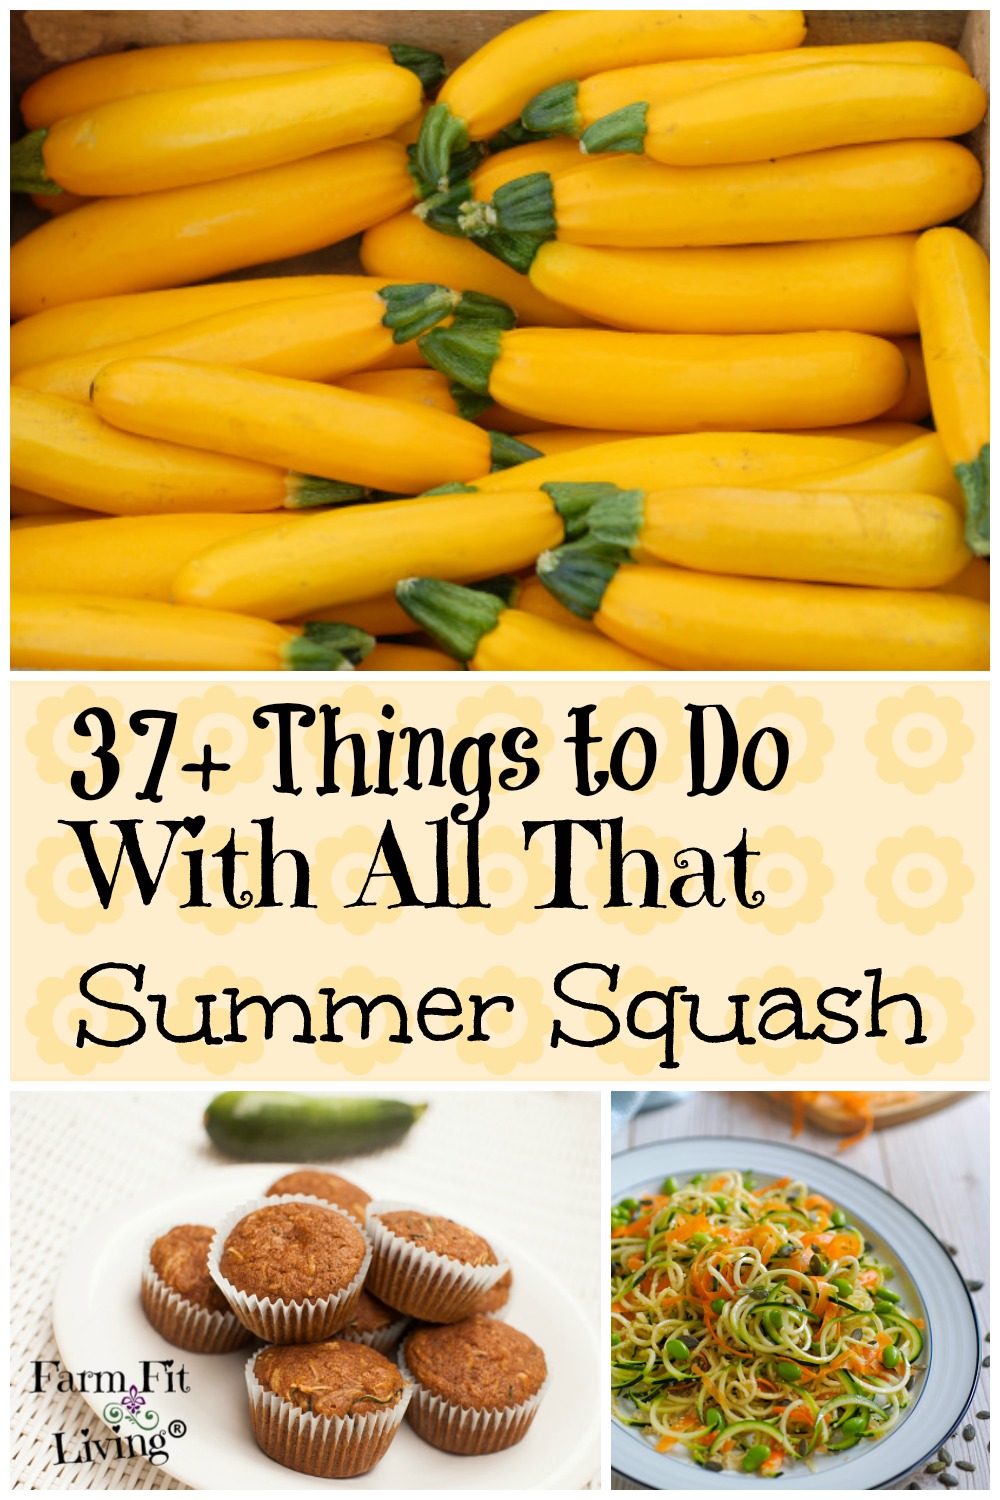 Things to do with all that summer squash